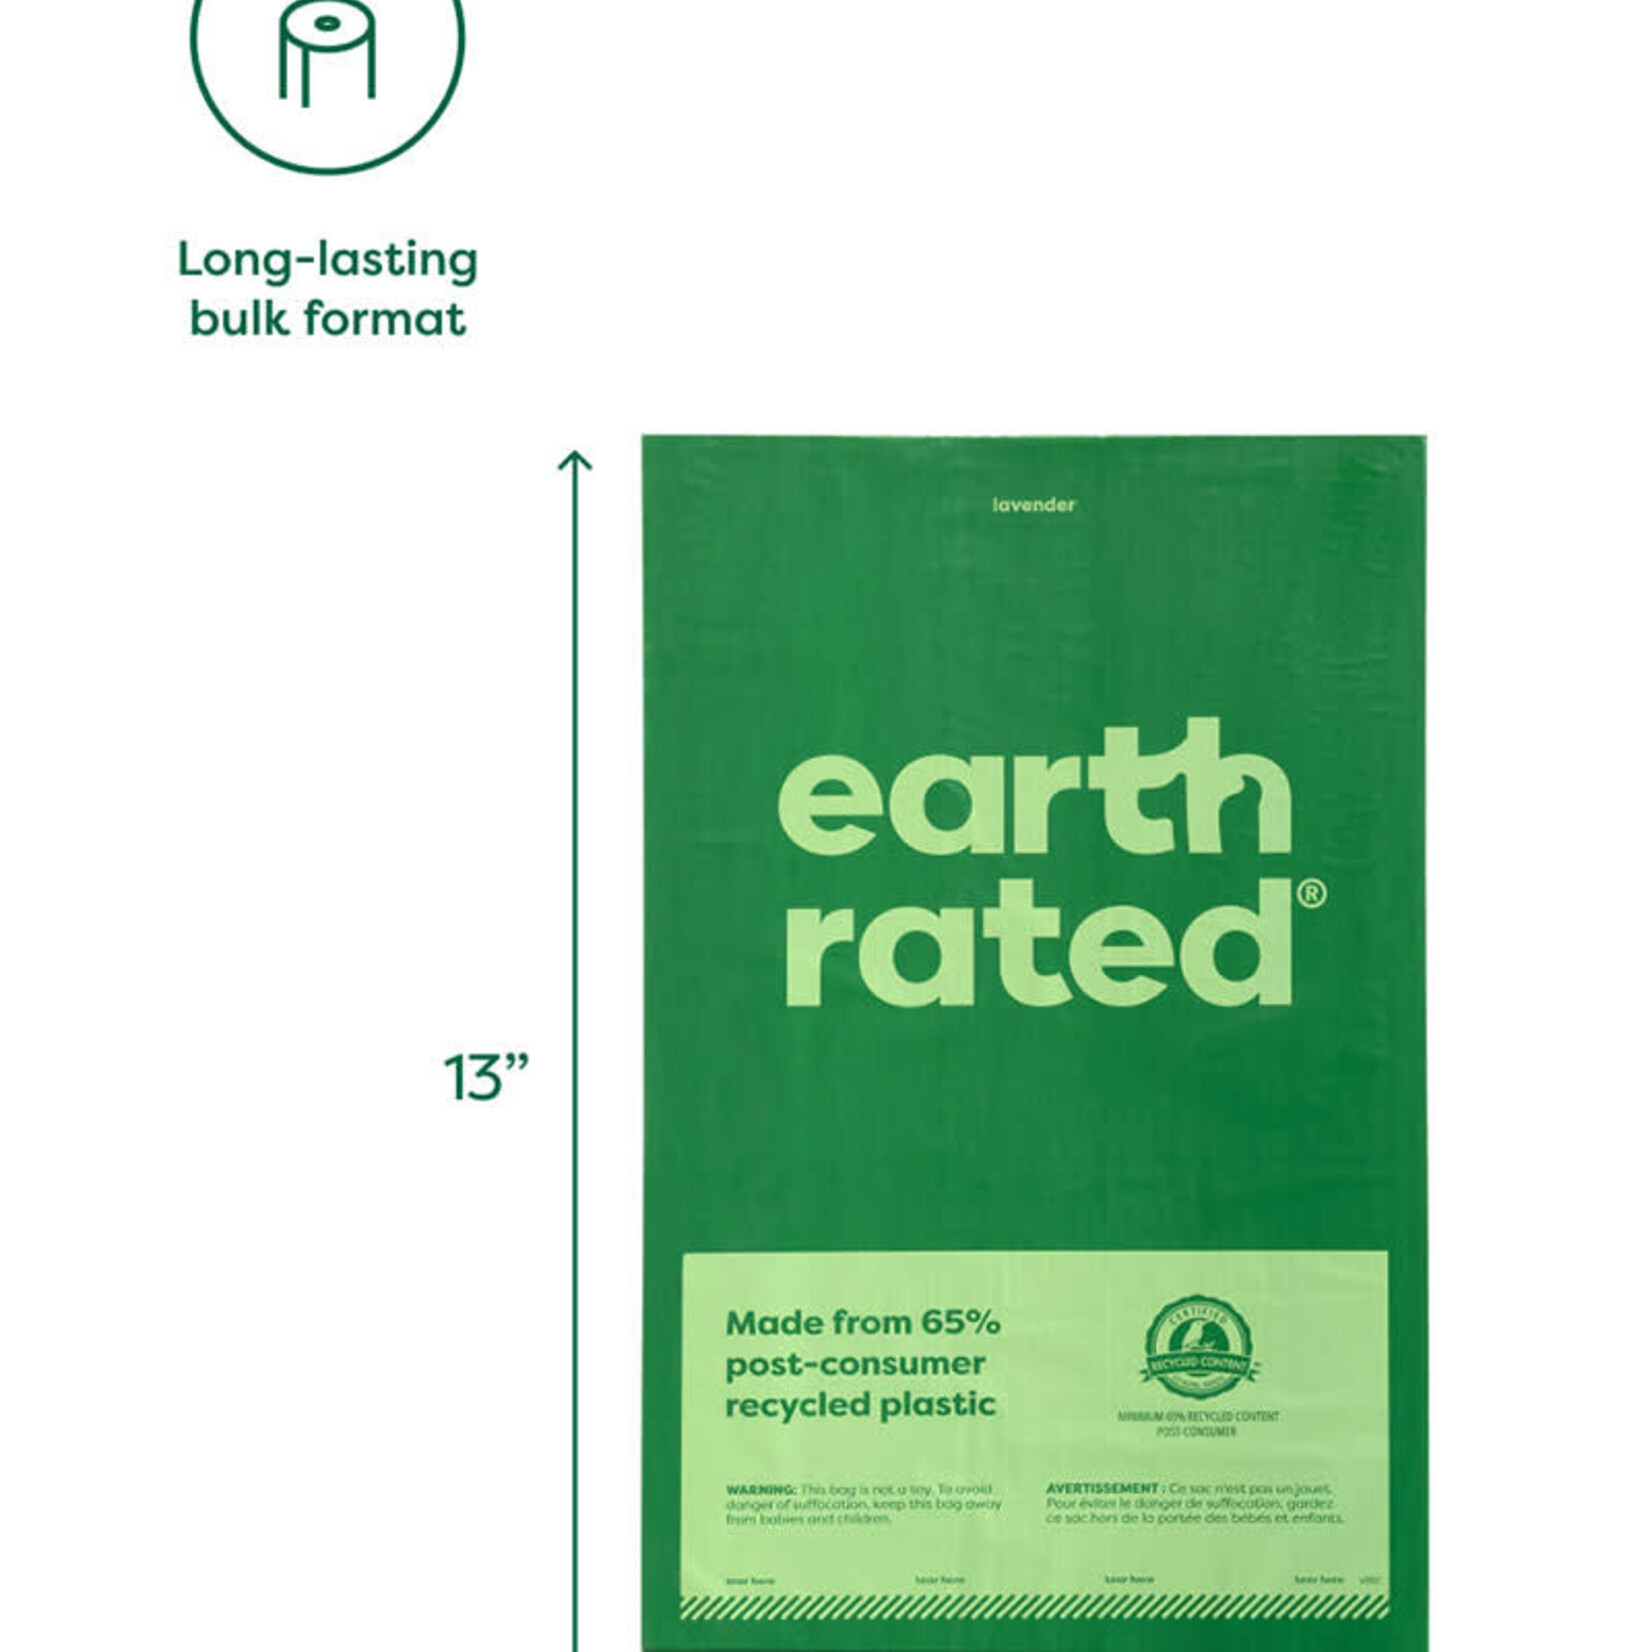 Earth Rated PoopBags Earth Rated - Single Roll Value Pack - Unscented - 300 Bags